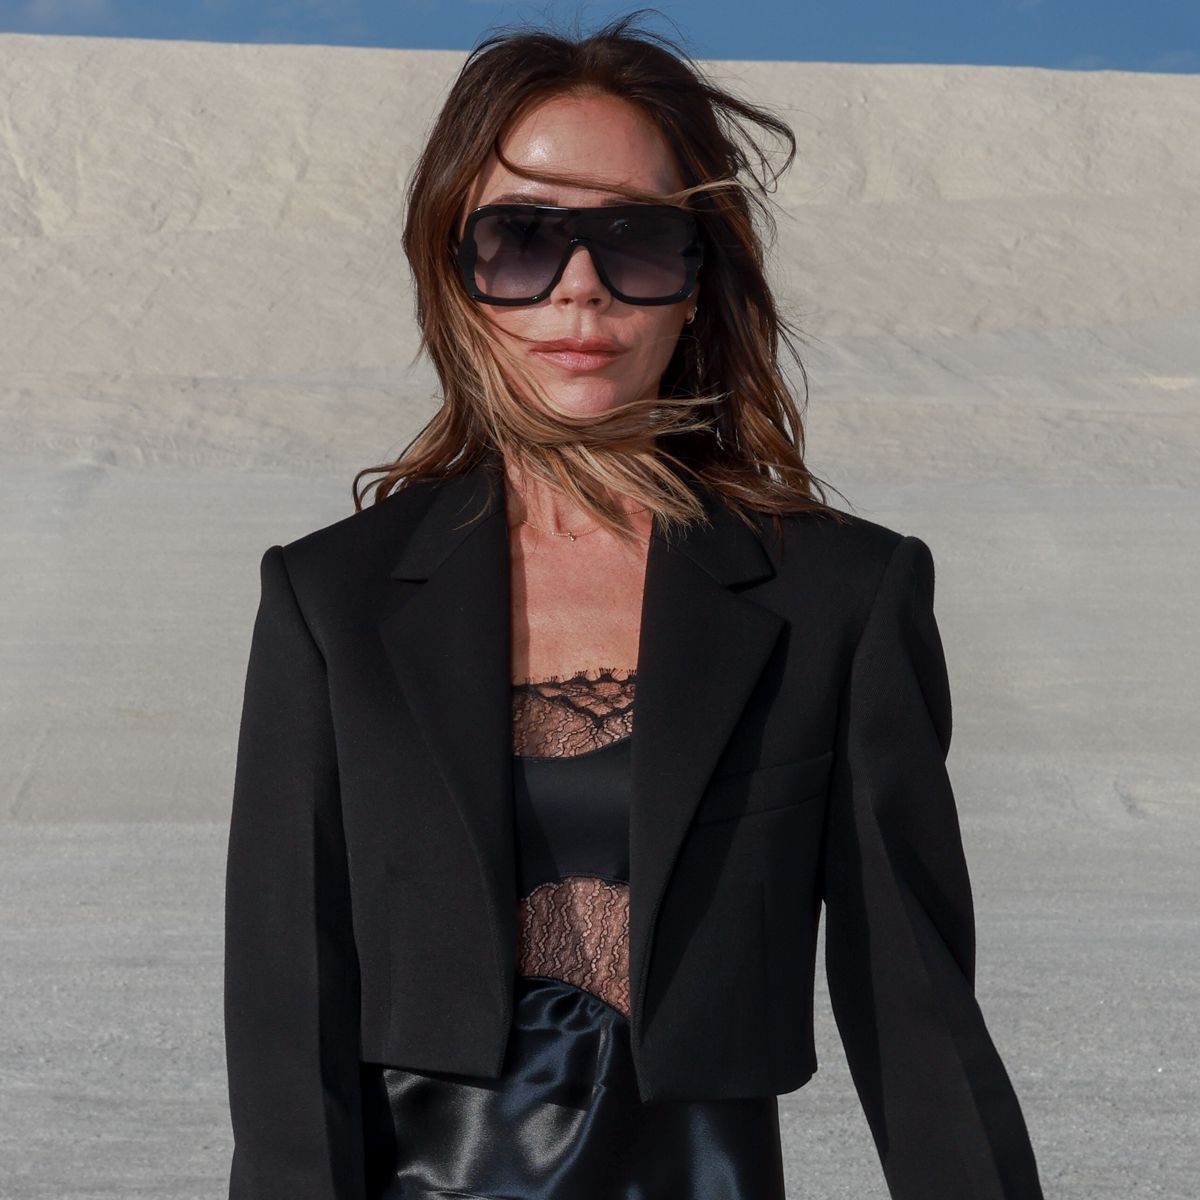 Victoria Beckham Style: 43 Looks Anyone Can Copy